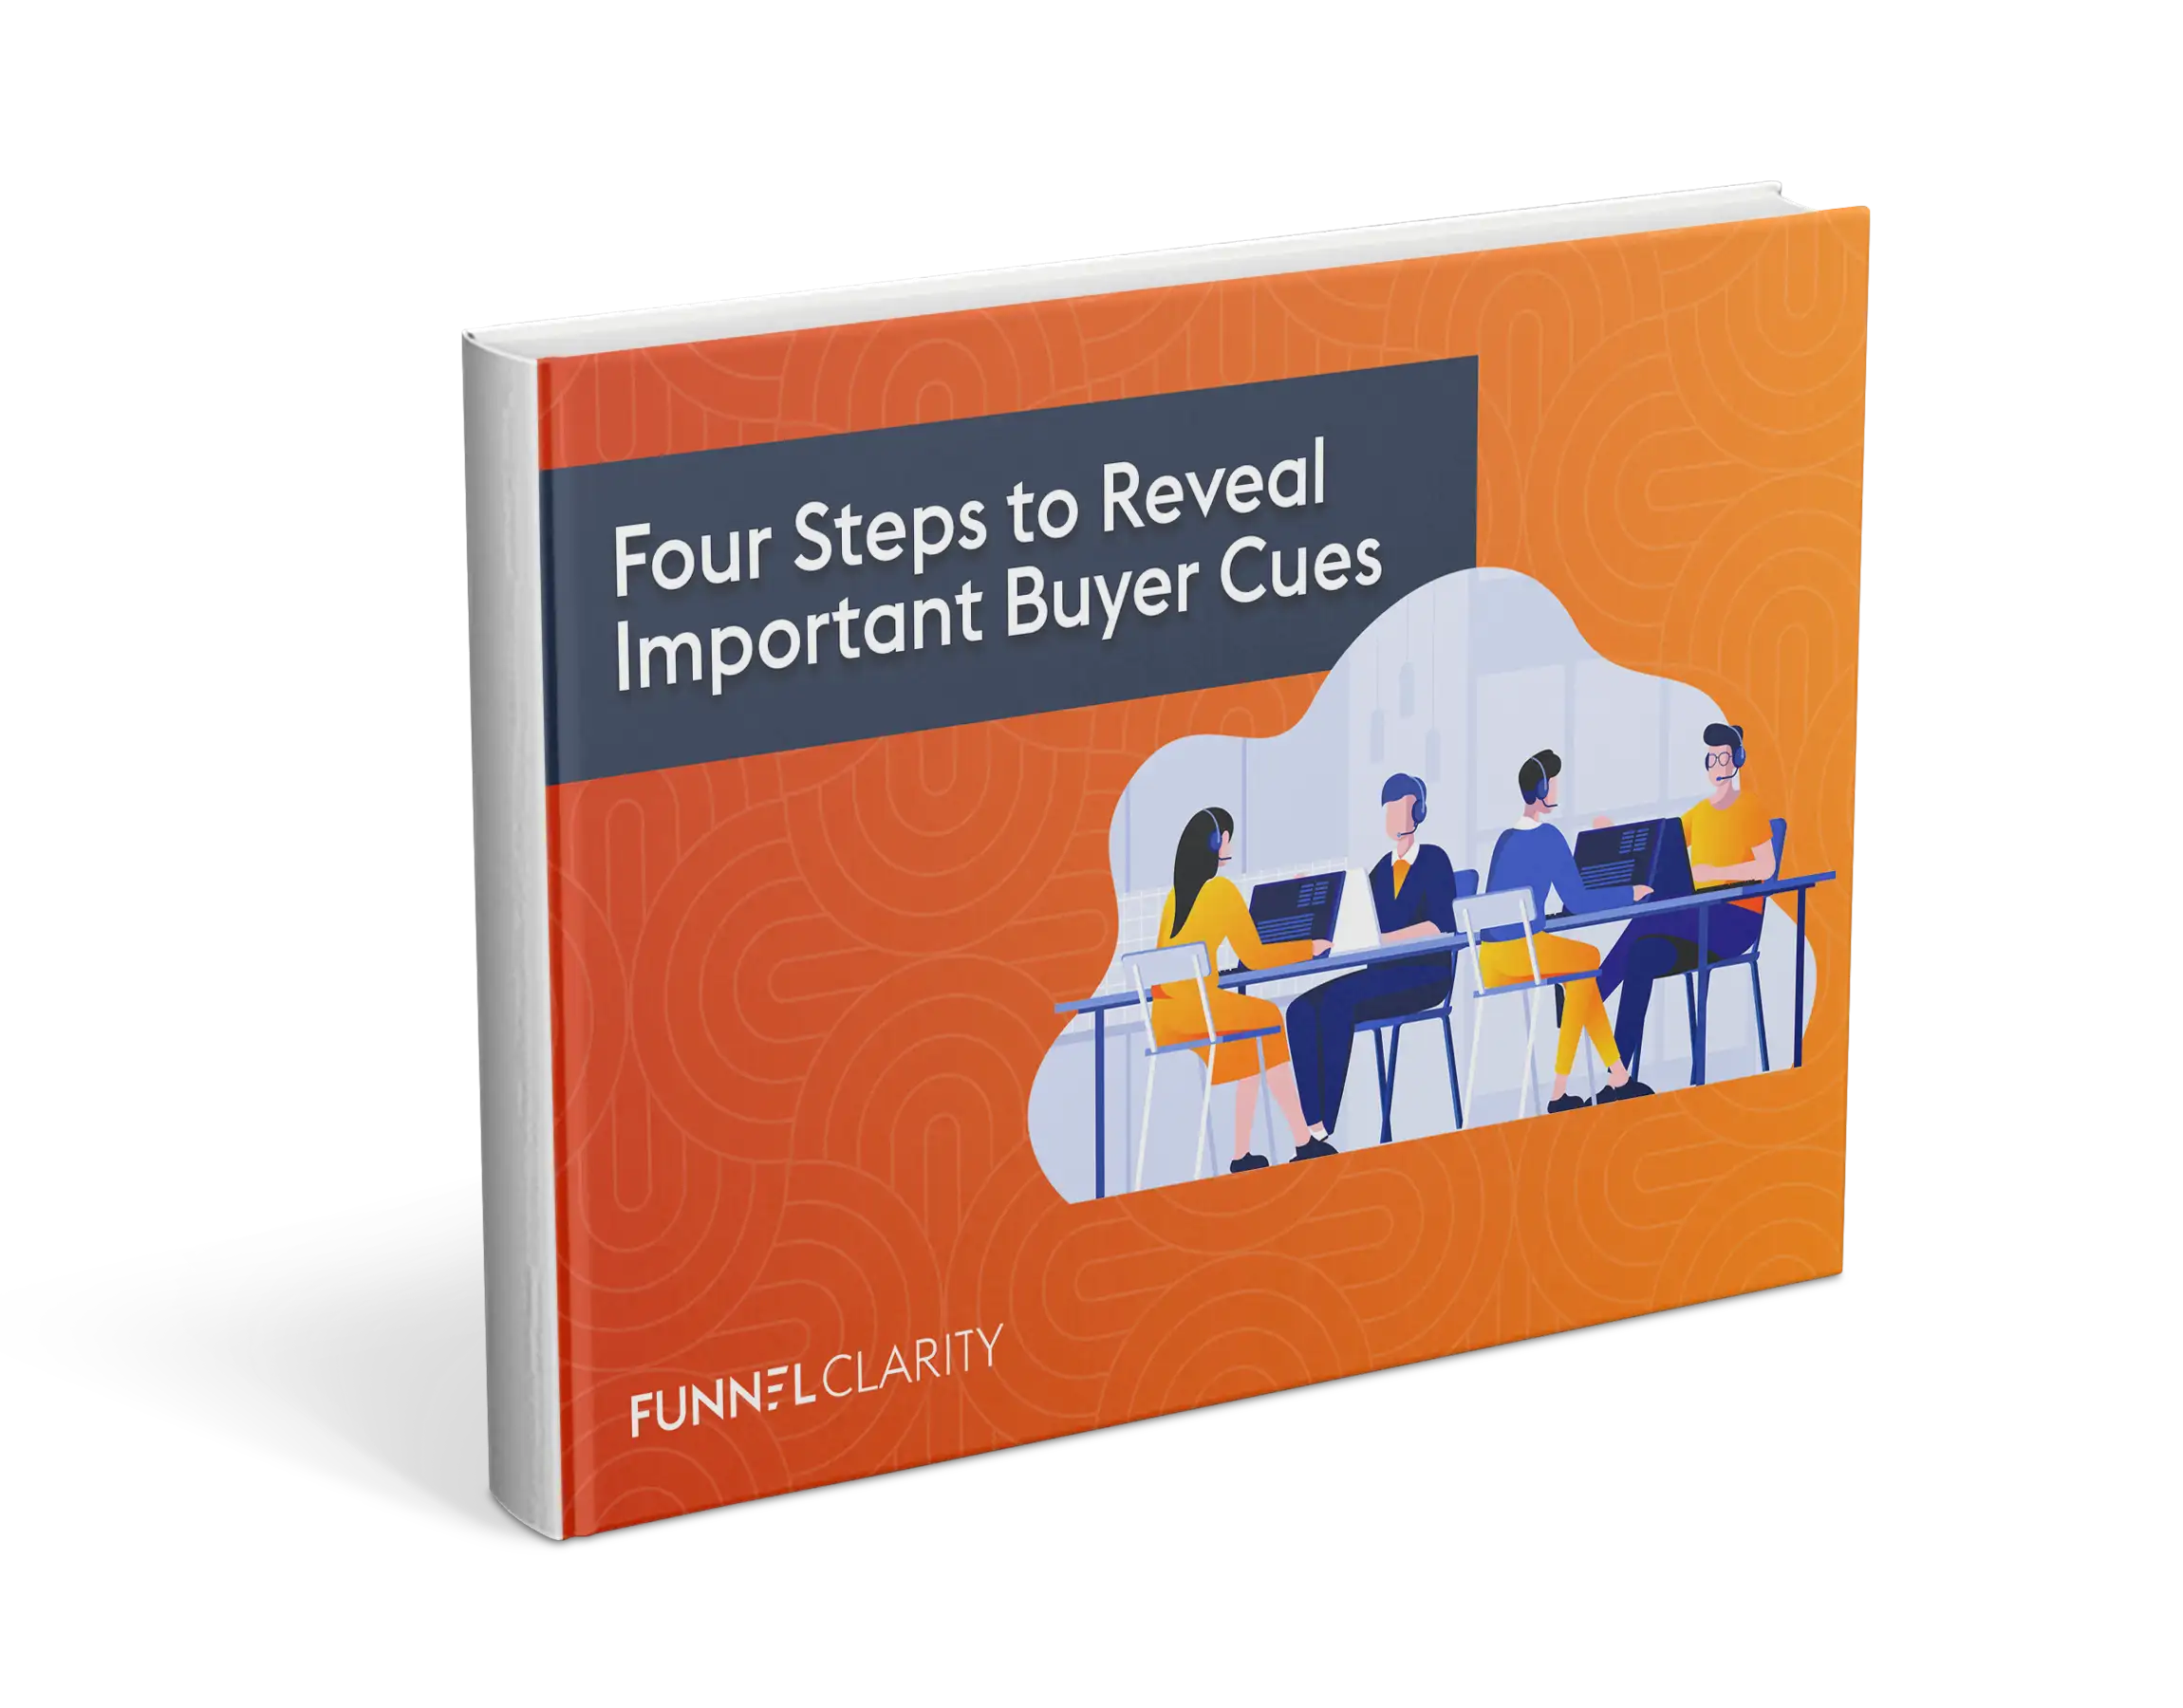 4-steps-to-reveal-important-buyer-cuew-mockup